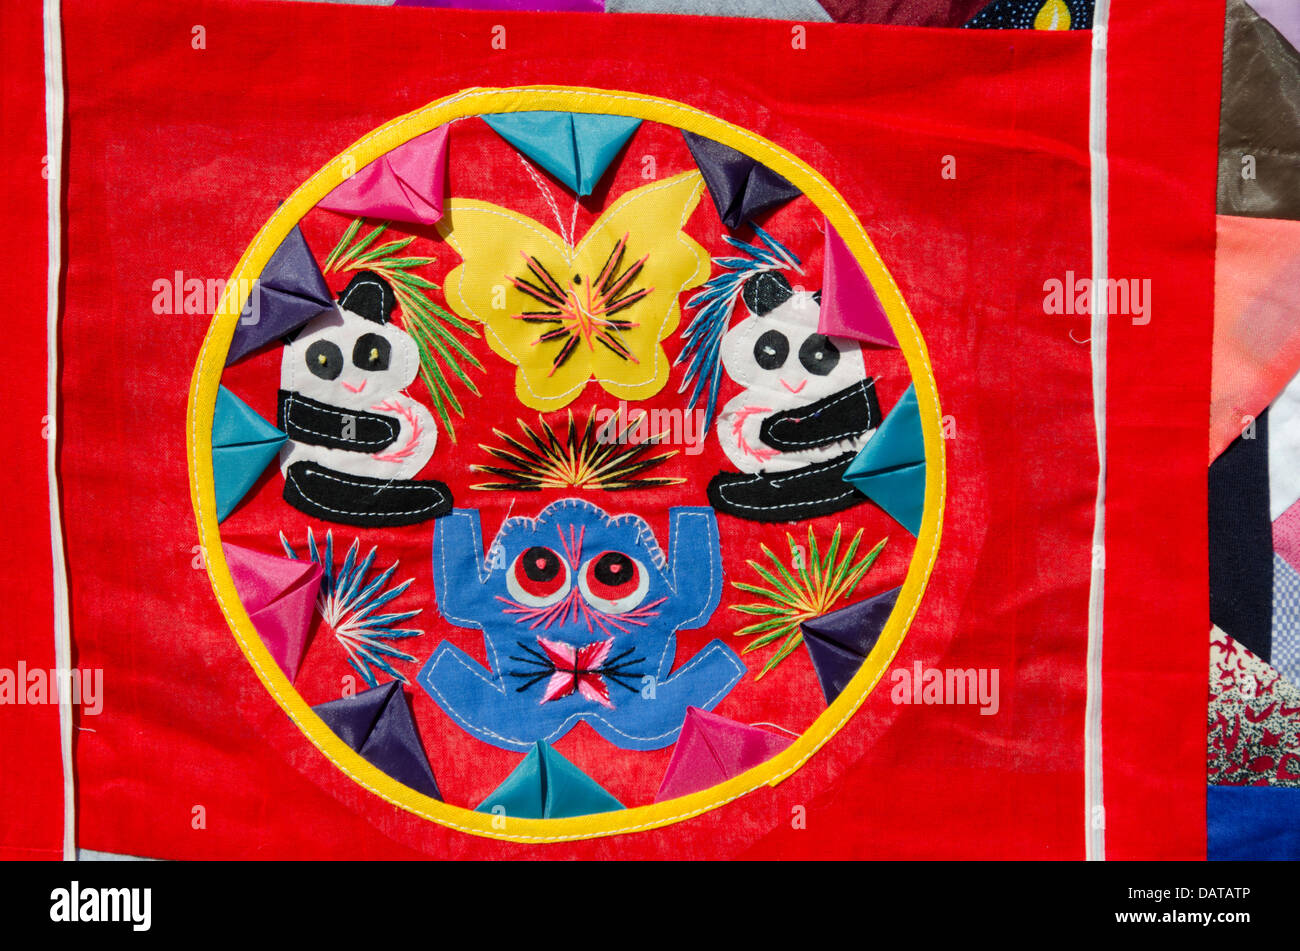 China, Beijing. Traditional Chinese handicrafts. Colorful Chinese embroidery quilt with panda bears and frog design. Stock Photo